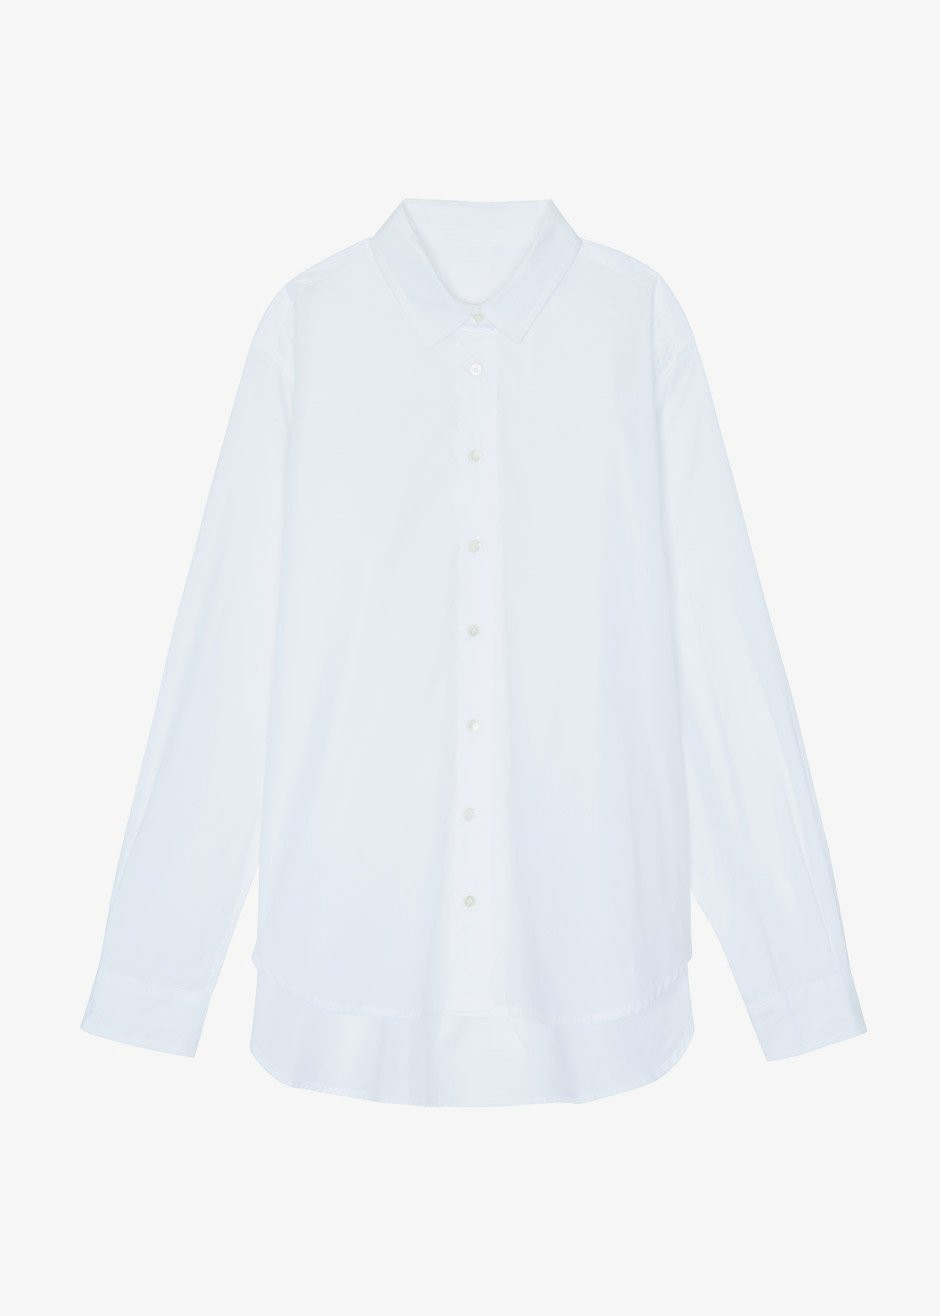 Classic Oversized Button-down Shirt, The Frankie Shop, Rs 8124 approx